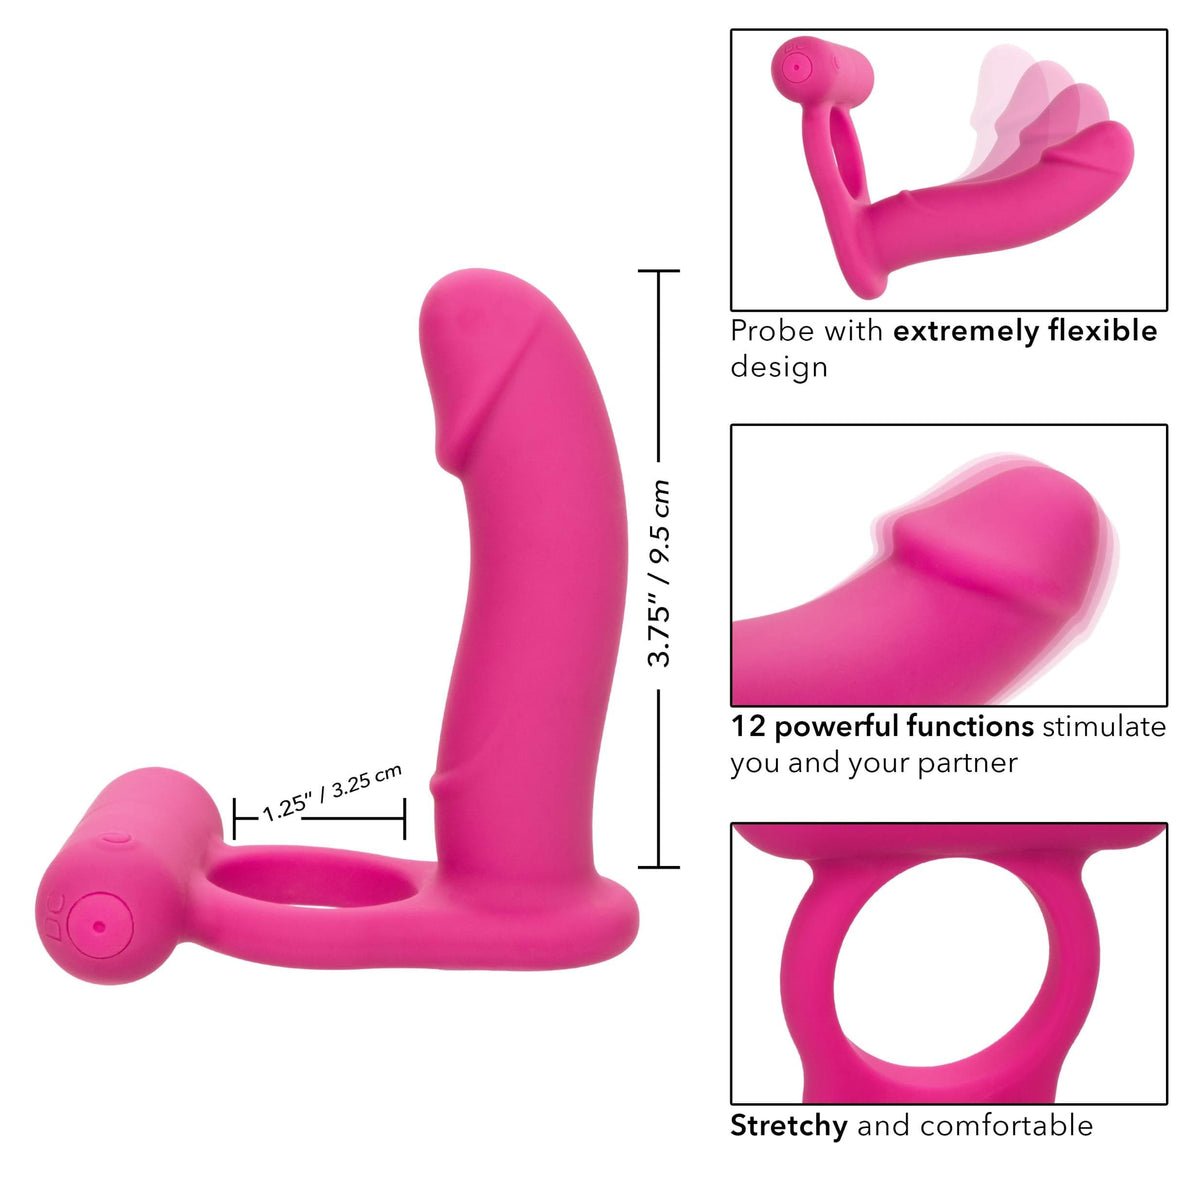 new sex toys, when is black friday 2022, how many days until black friday 2022